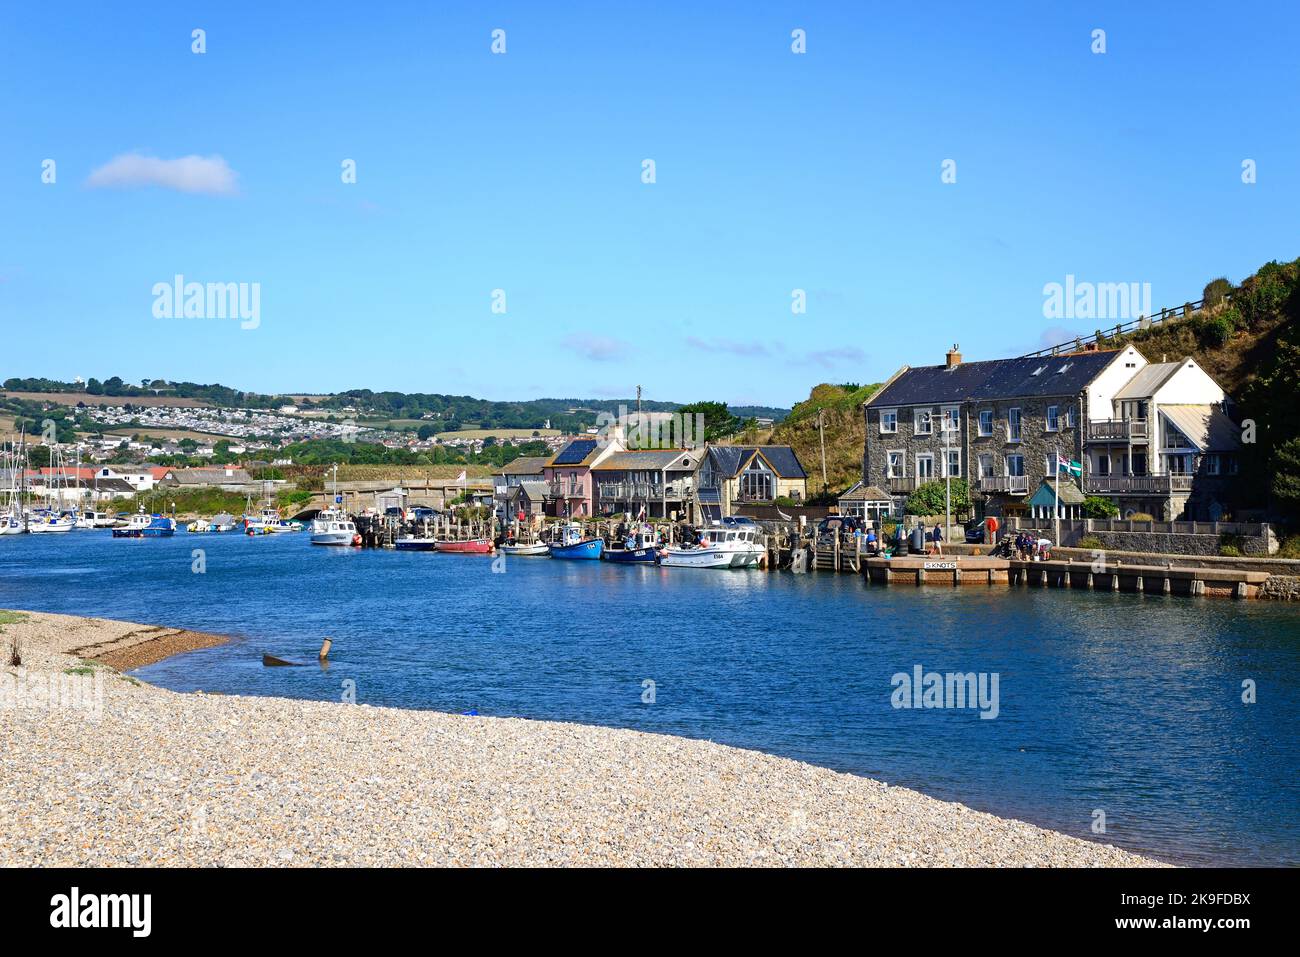 Fishing boats and yachts moored along the River Axe in the harbour with buildings and countryside to the rear, Axmouth, Devon, UK. Stock Photo